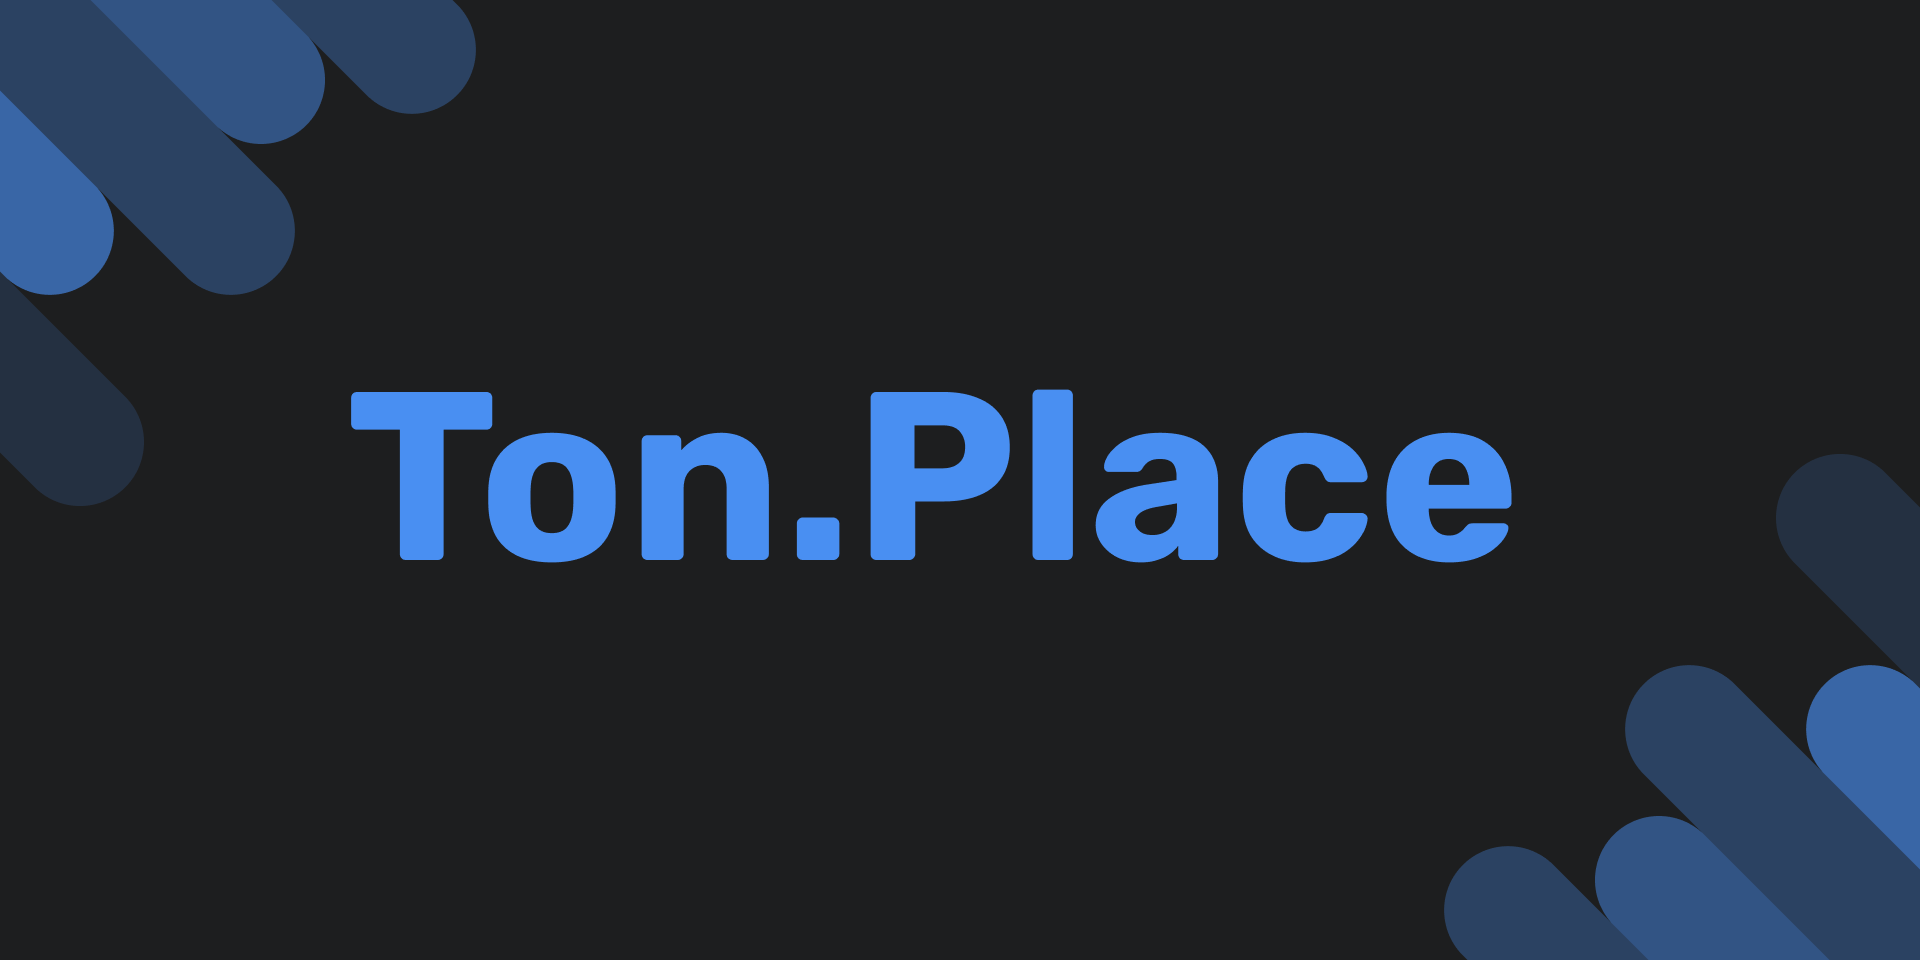 ton place is a social network with a subscription